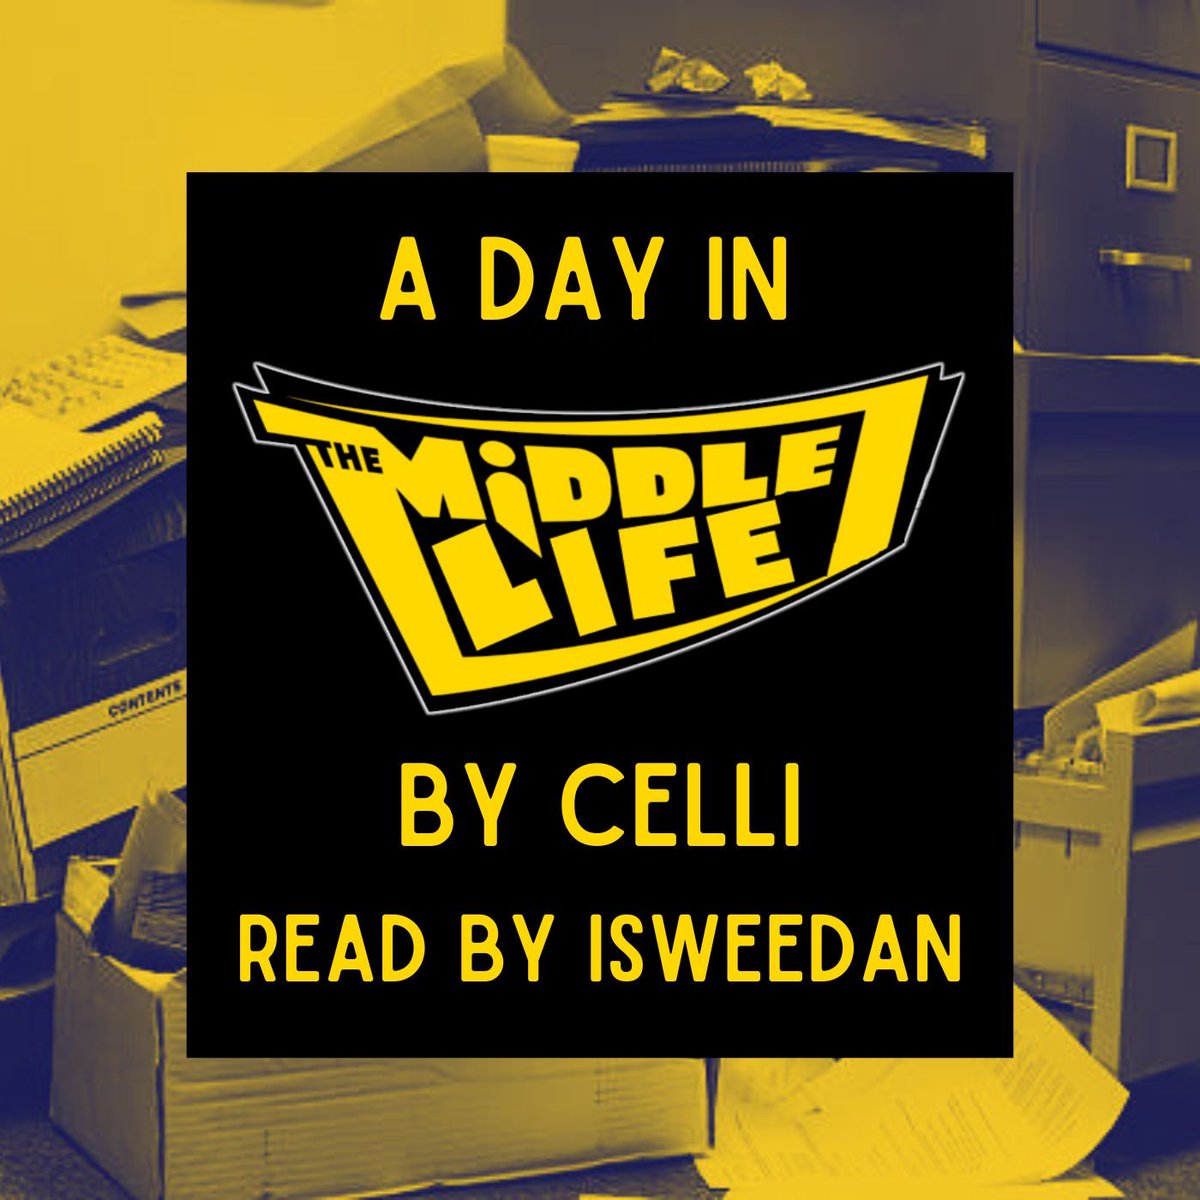 Sharing a new podfic for #EndOTWRacism by @isweedan, who is locked!

A podfic of 'A Day in the Middlelife' by @celli 
Read by @isweedan, who also made the cover art

archiveofourown.org/works/47253280
Fandom: The Middleman
Length: 9 min 30 sec